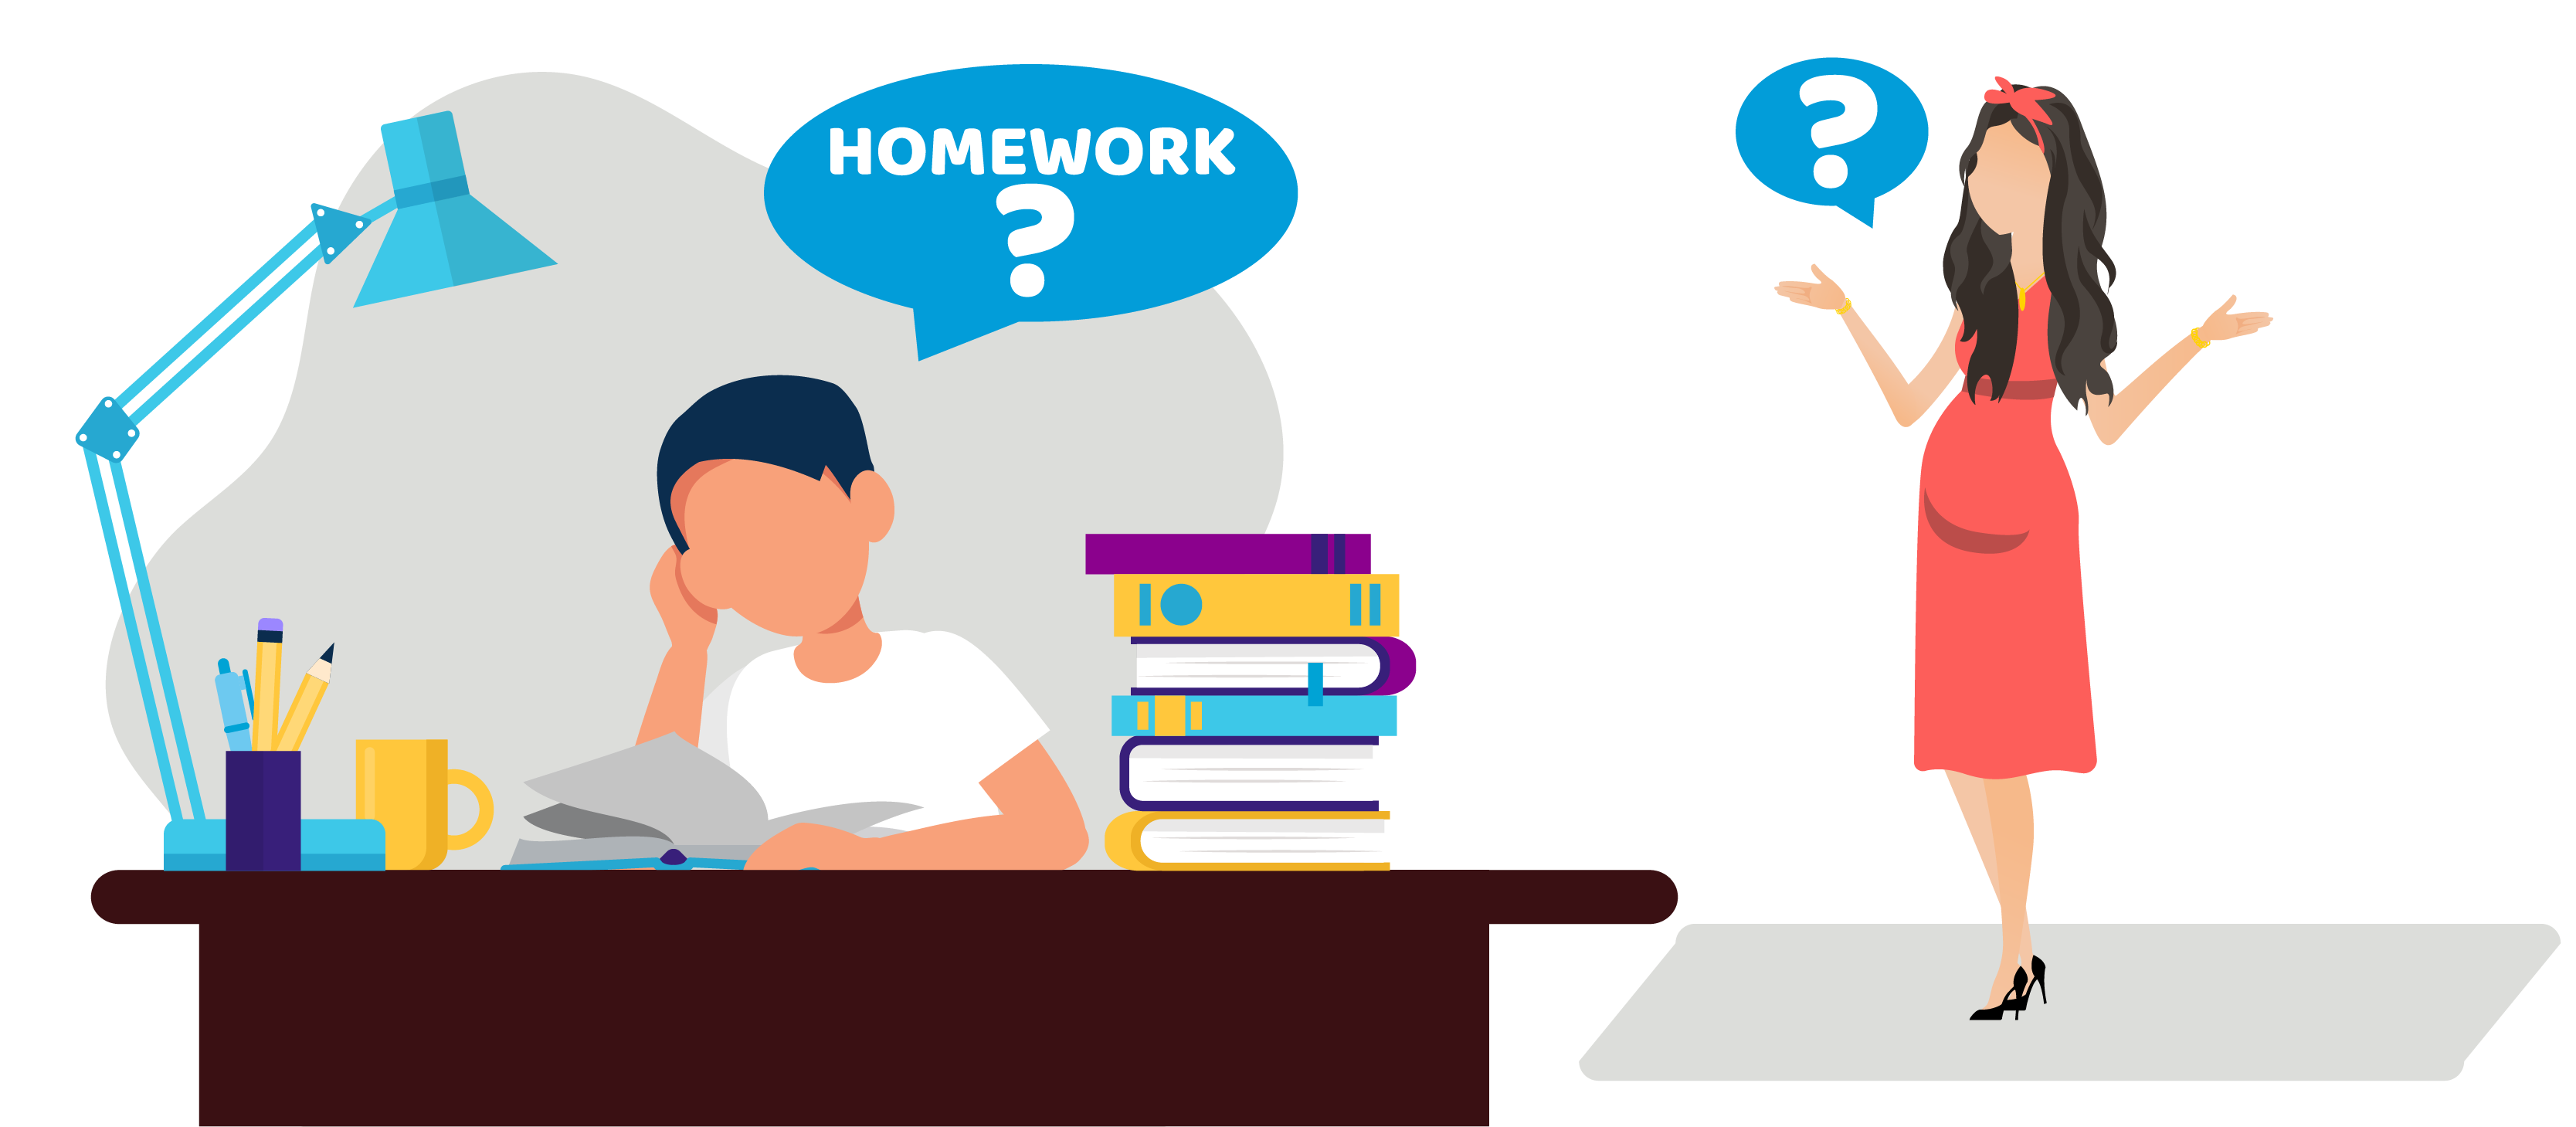 Child doesn't know how to do their homework and the parent doesn't understand it either